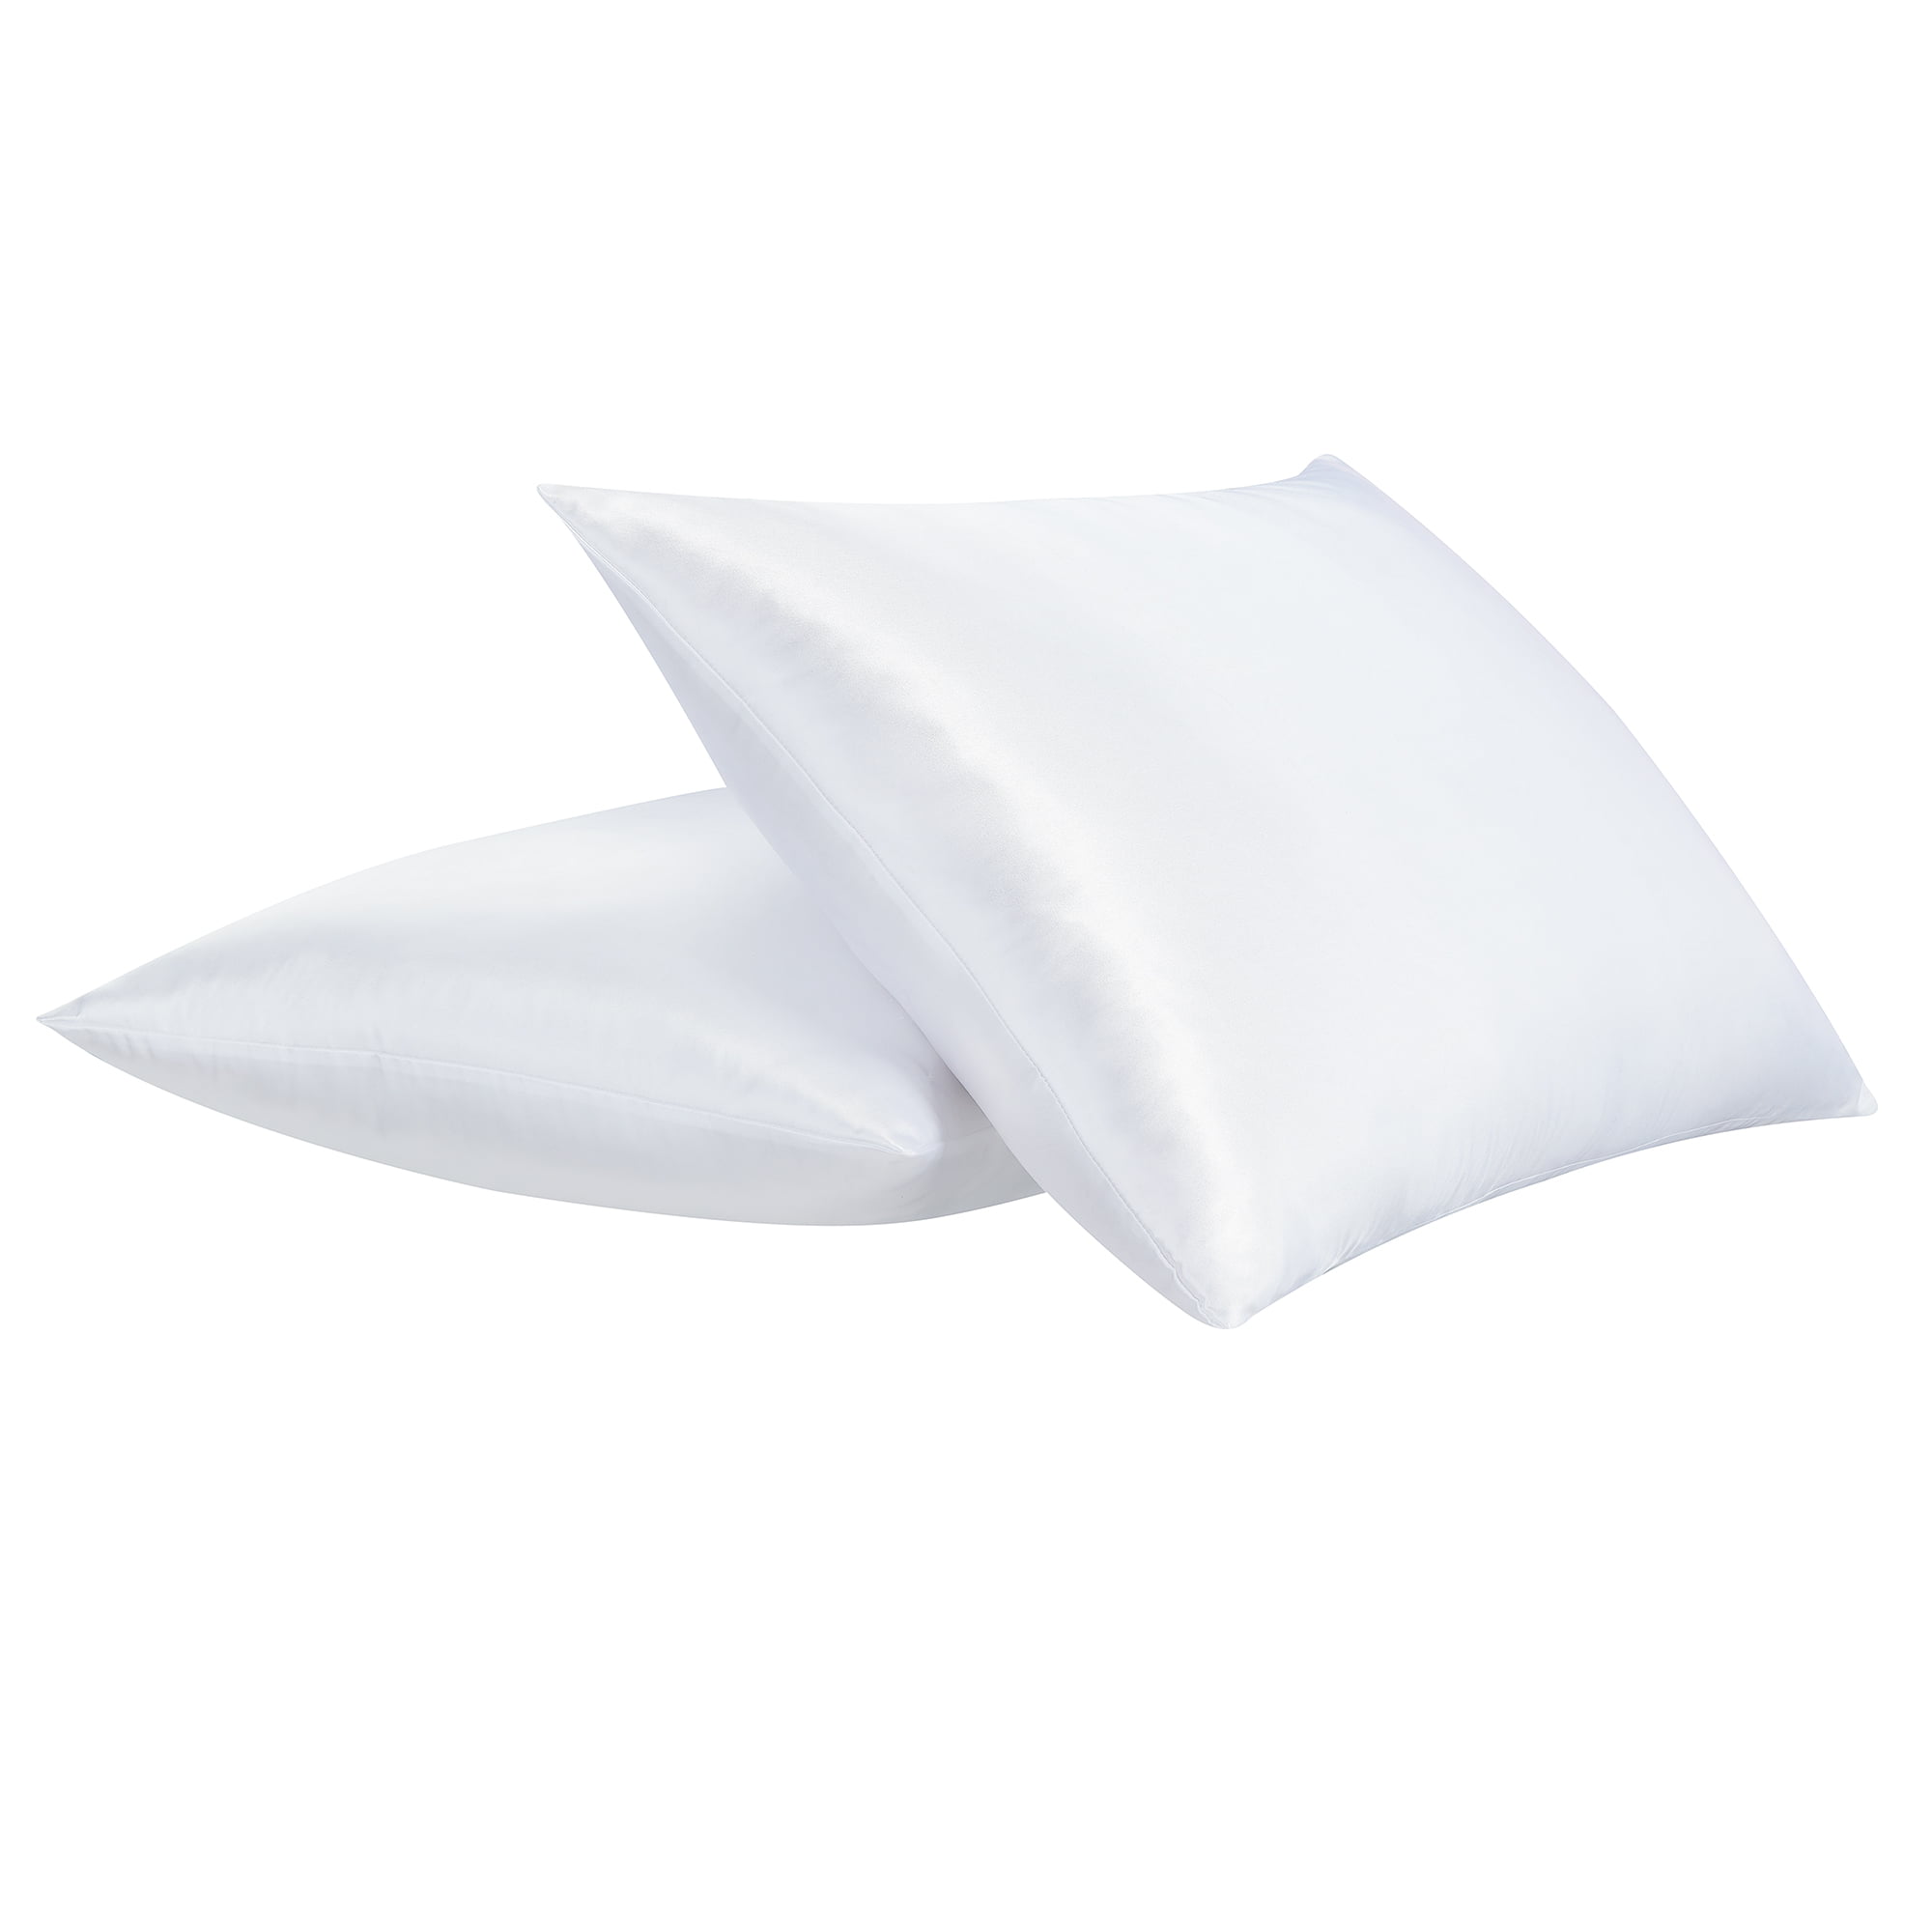 Details about   2 DELUXE ZIPPERED FABRIC PILLOW COVERS BED BUG PROTECTOR HYPOALLERGENIC 20x30 